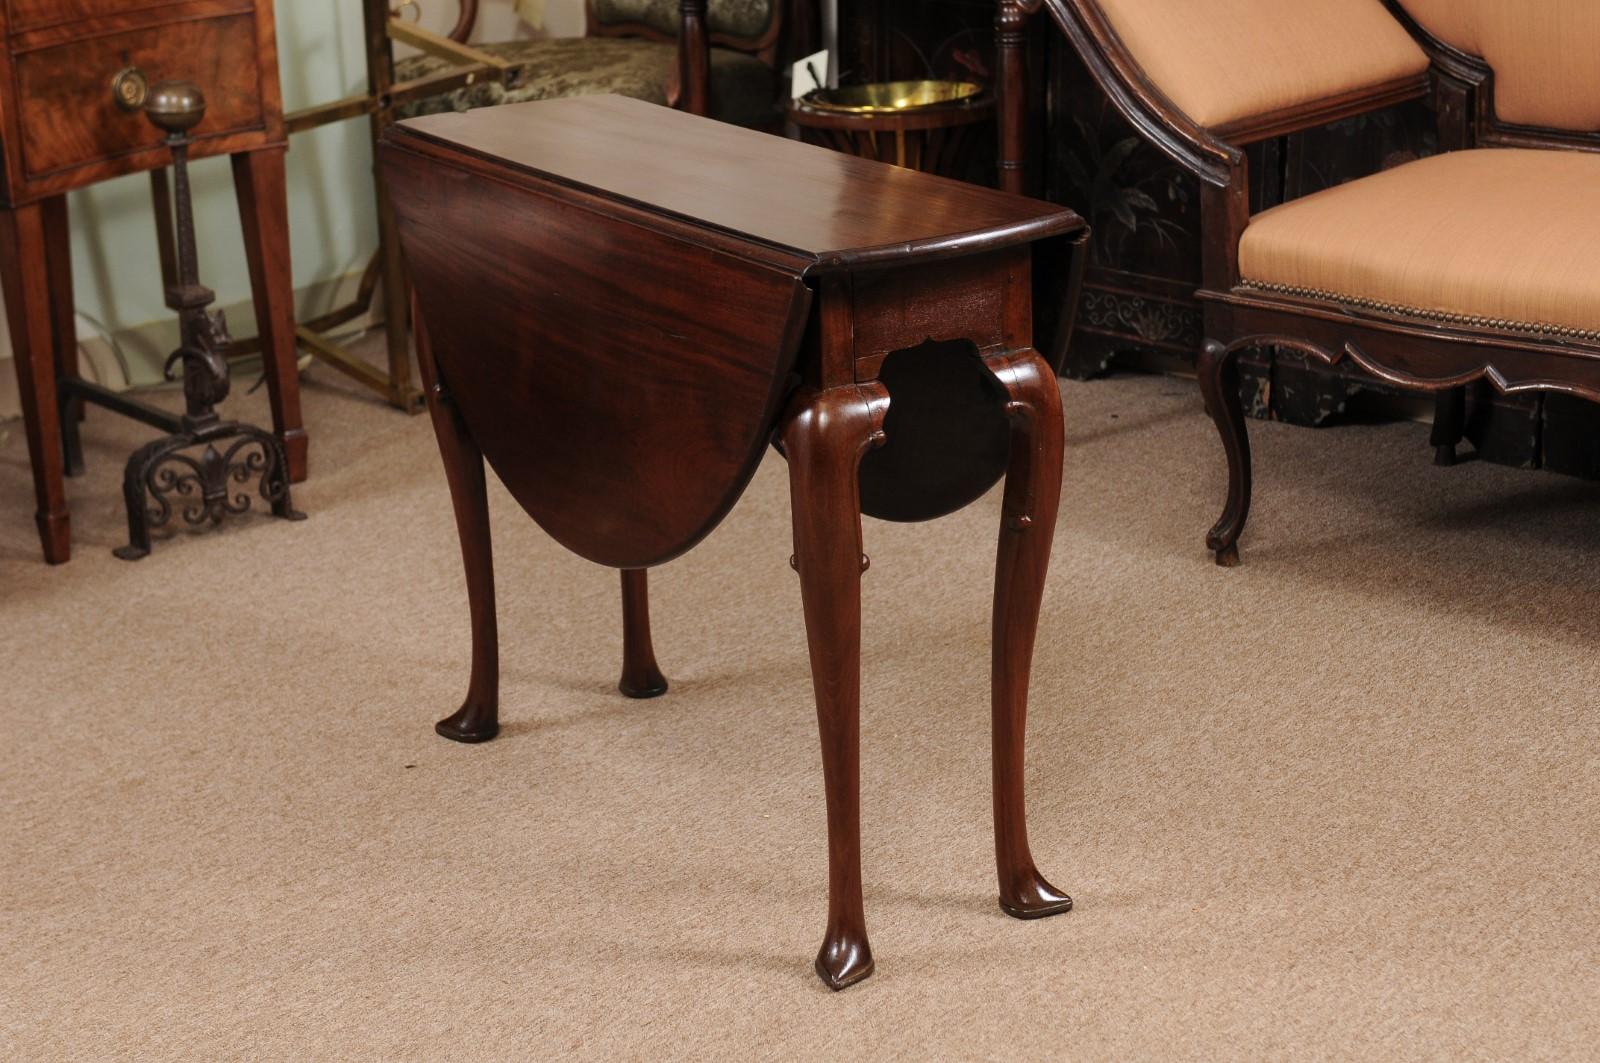 Queen Anne period mahogany drop leaf table with slipper feet, 18th century, England.
Dimensions with leaves open: 41